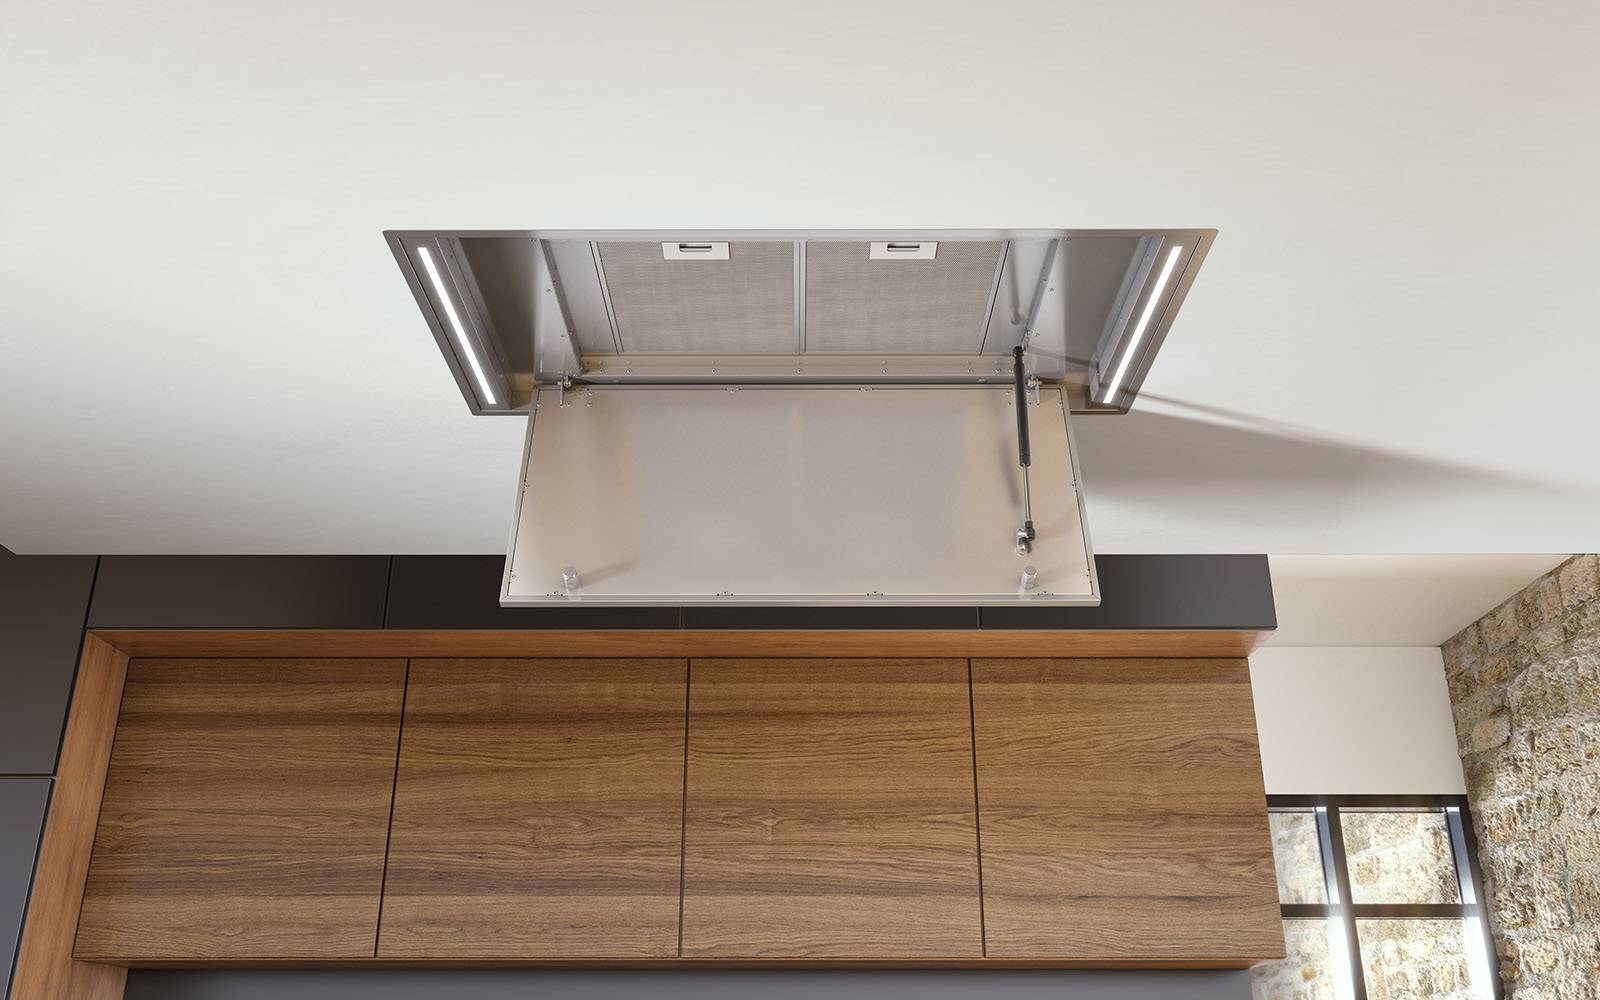 Airforce Silhouette 100cm Ceiling Mounted Cooker hood with Flat Motor- Stainless Steel Finish